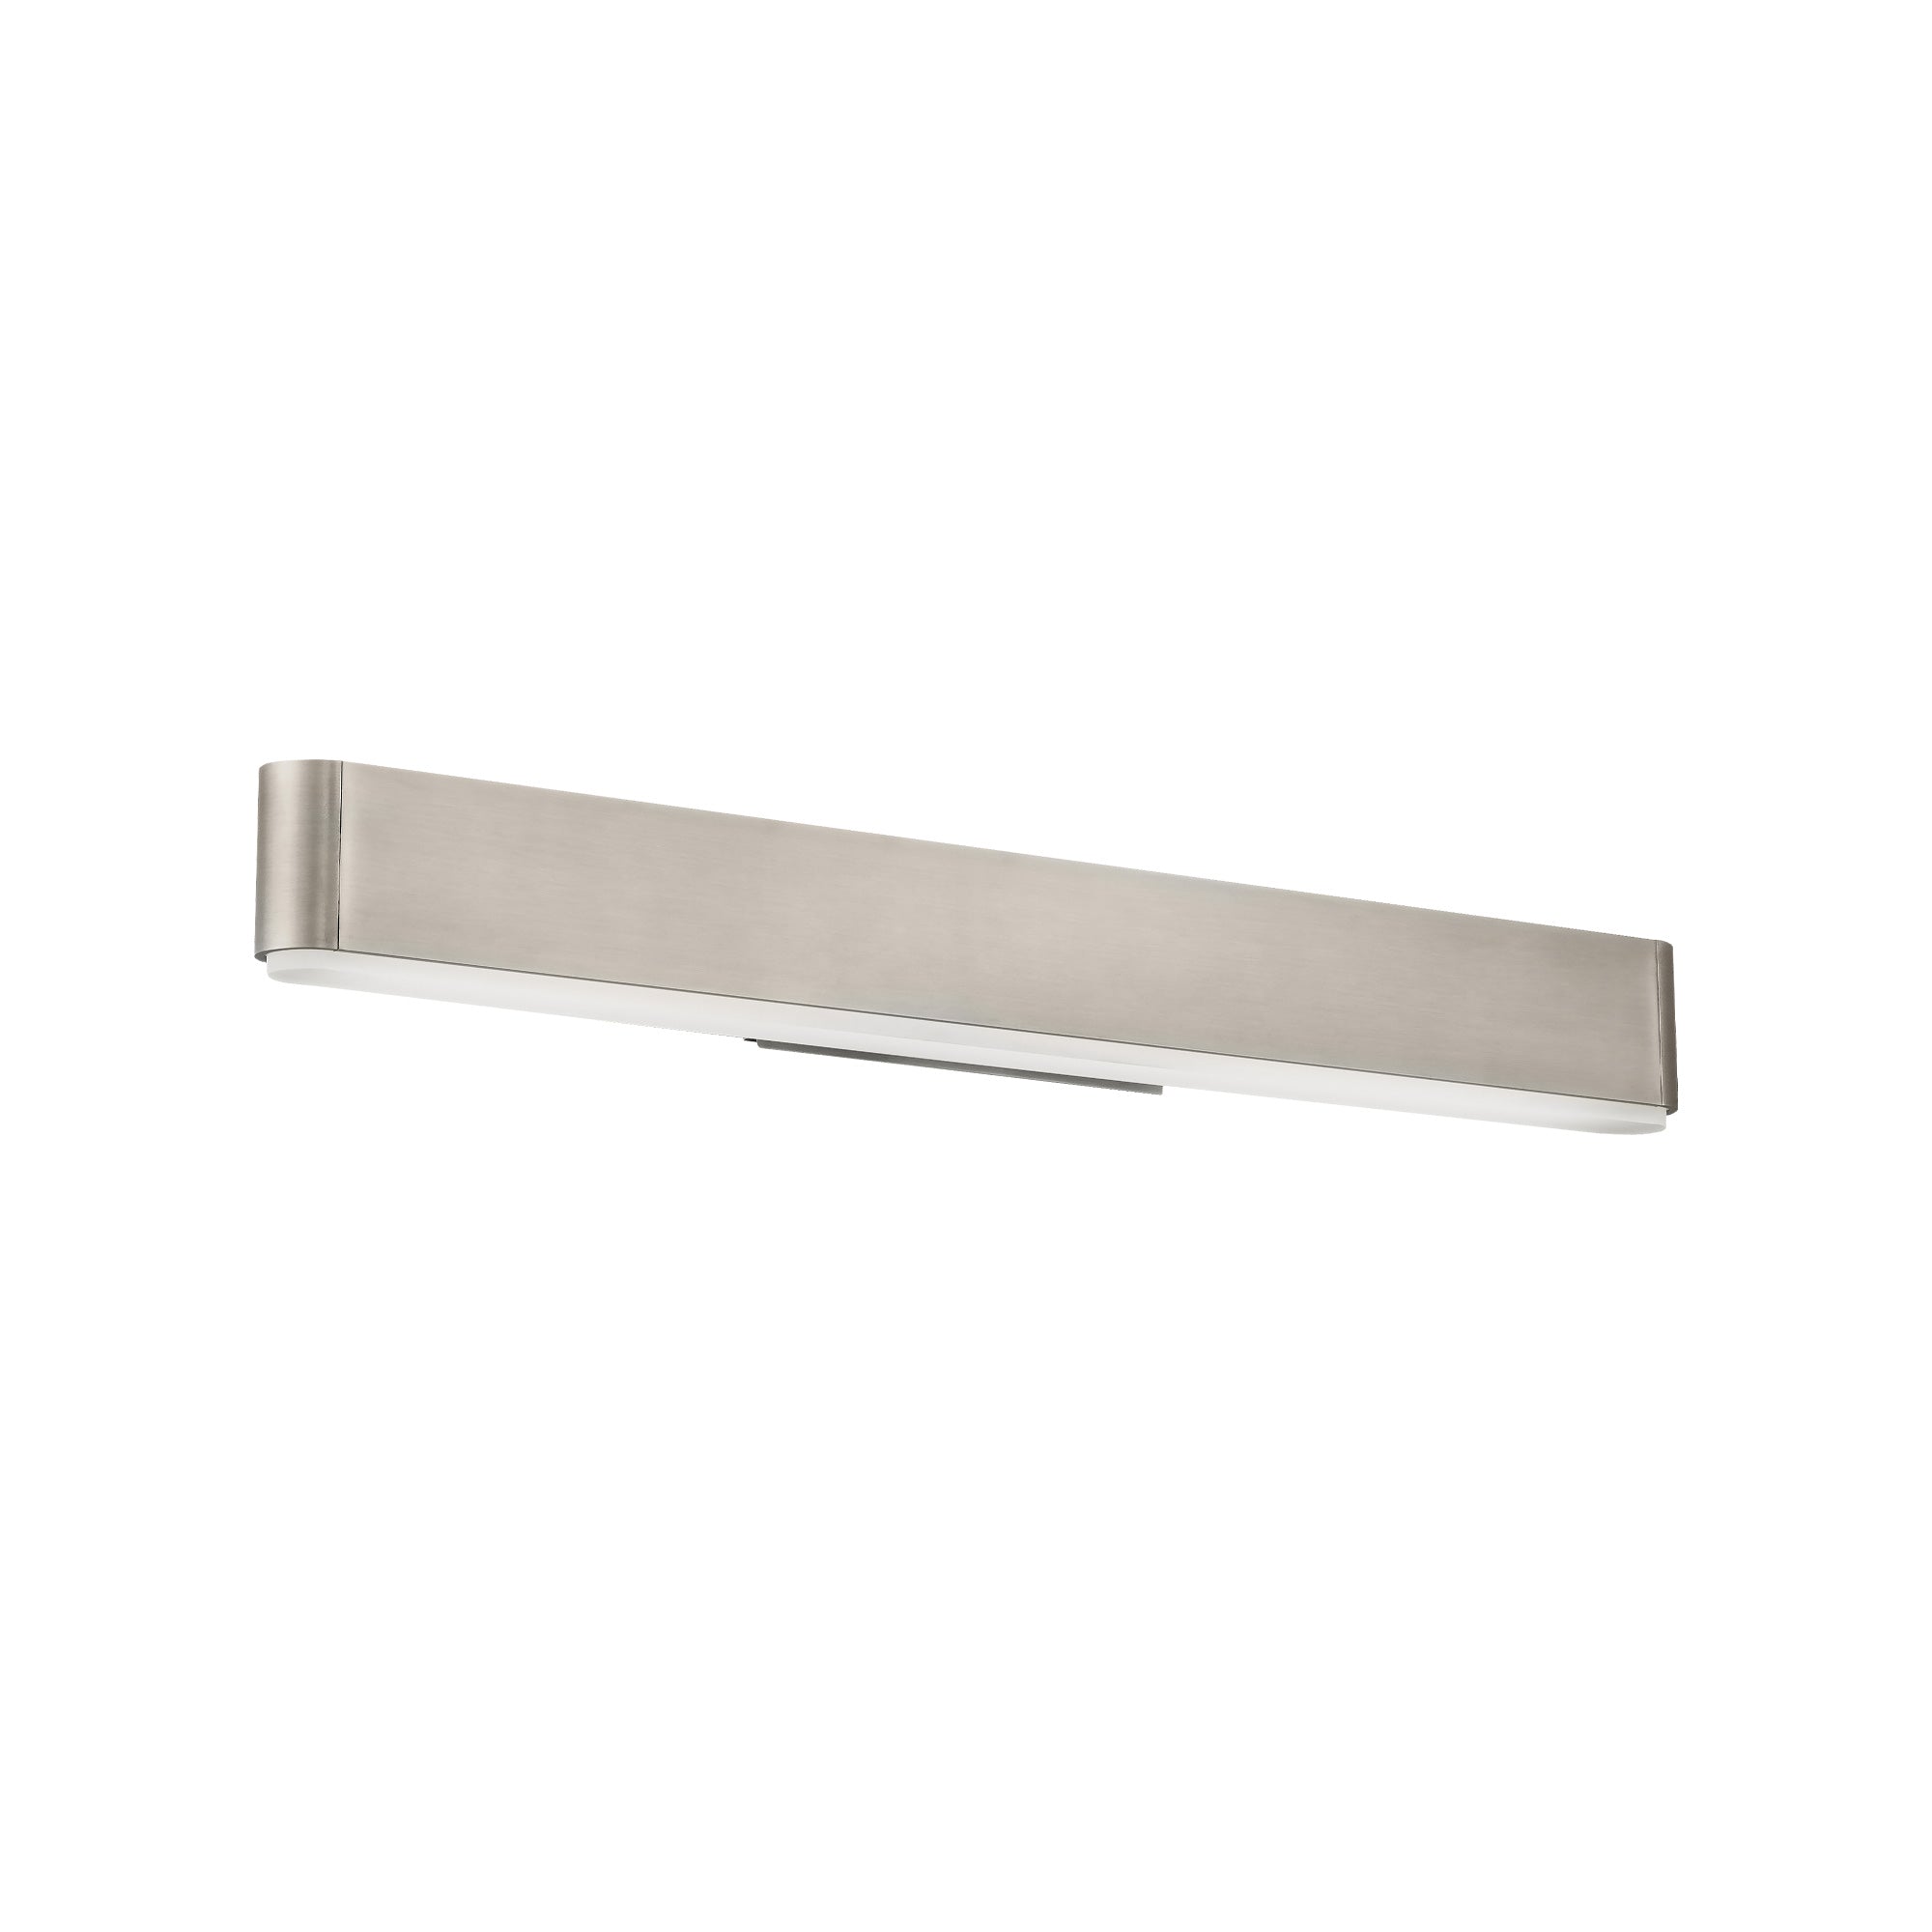 0 TO 60 Bathroom sconce Nickel INTEGRATED LED - WS-56124-30-BN | MODERN FORMS